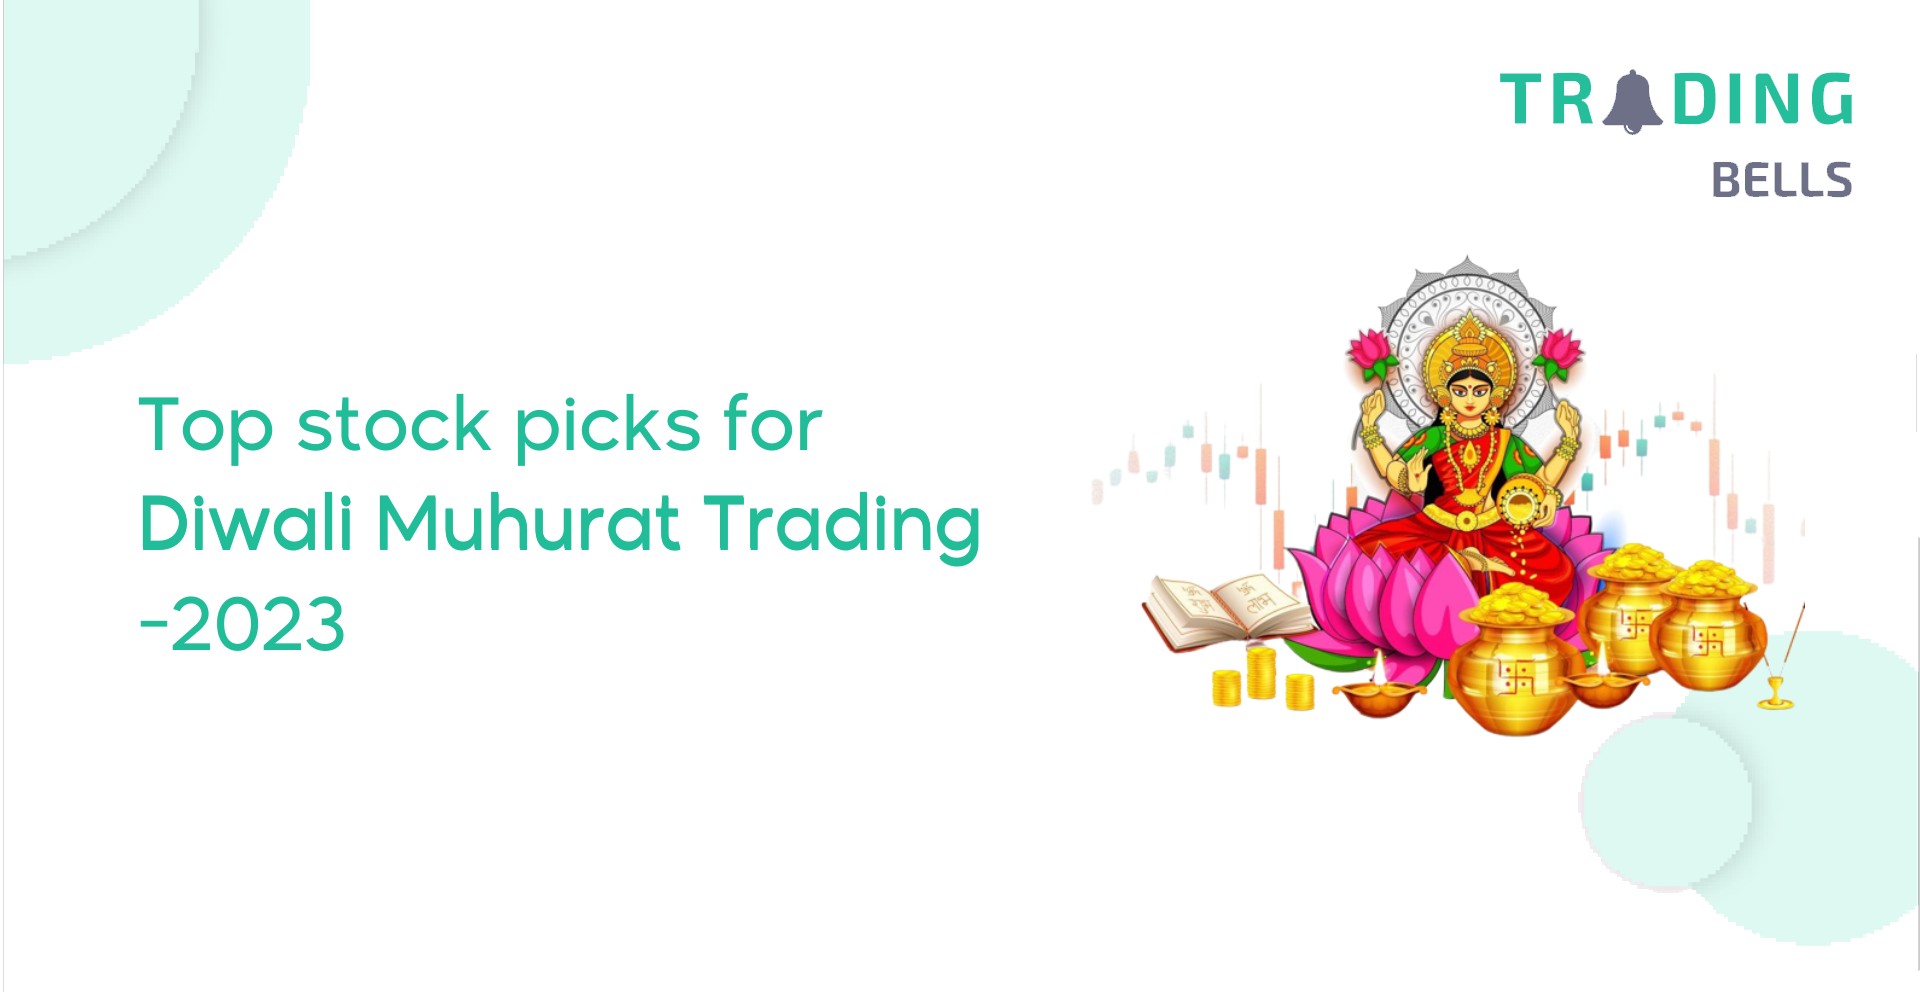 Top stocks companies to trade on this diwali